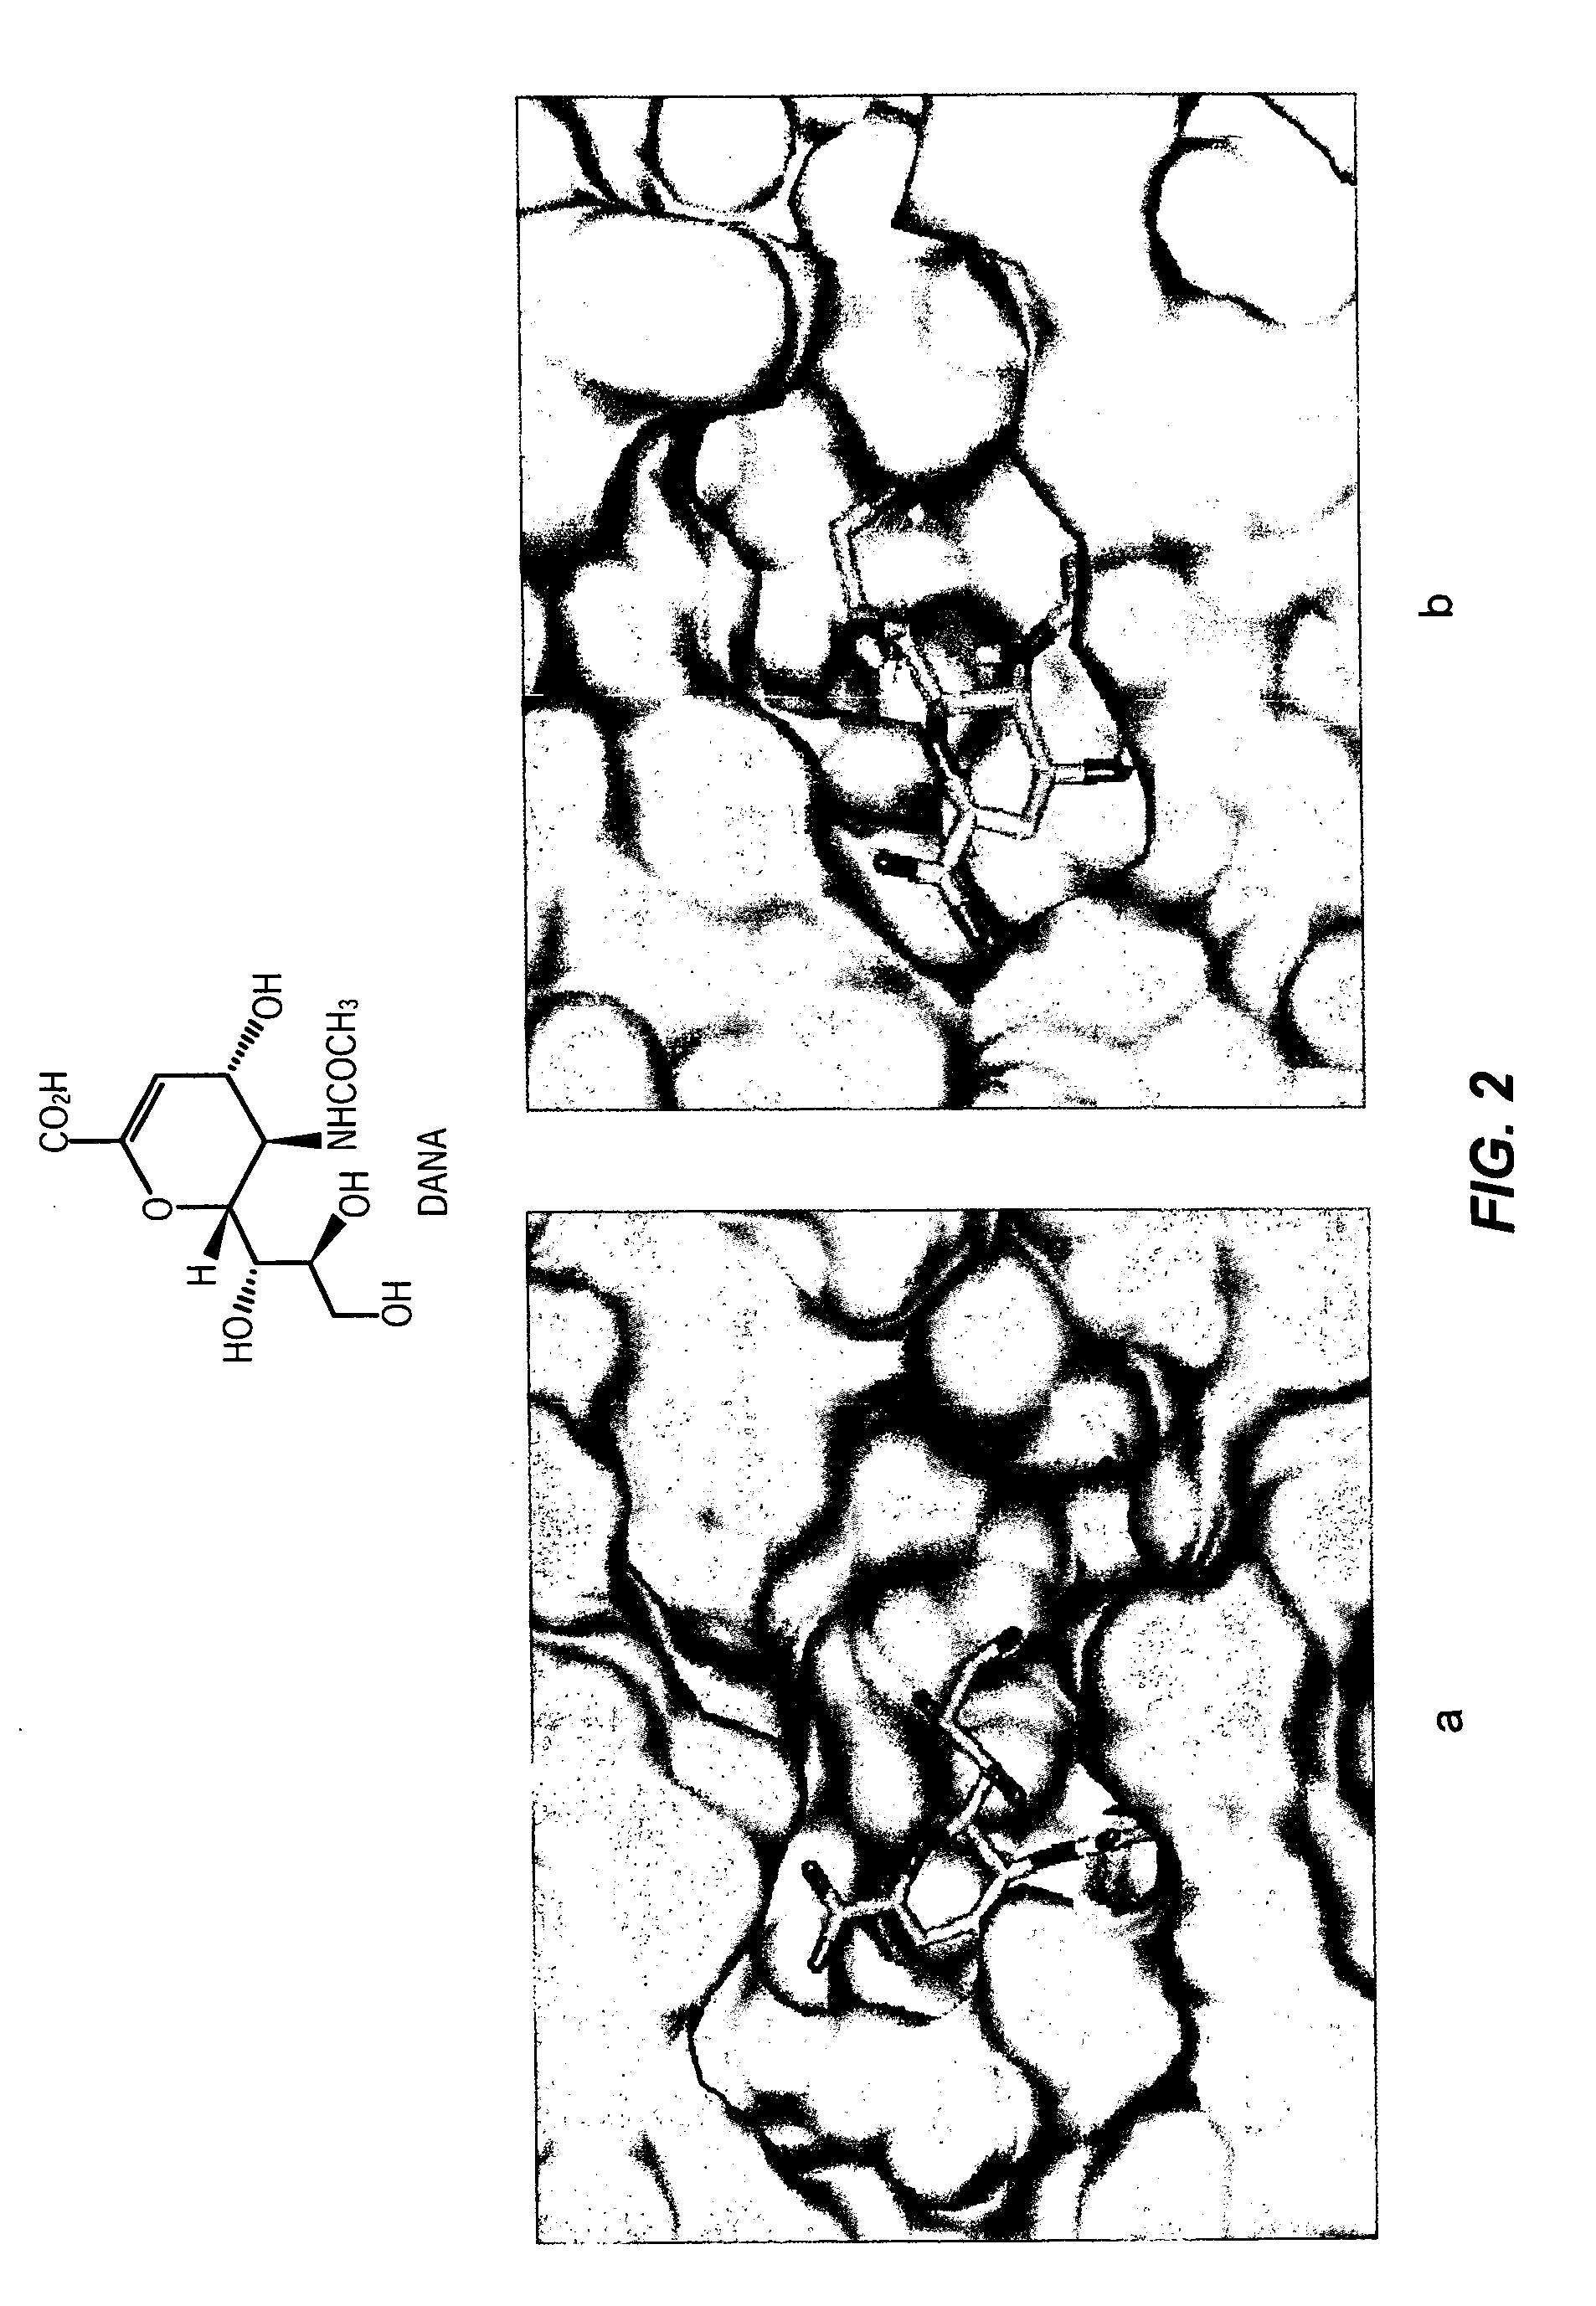 Labeled substrate conjugates for identifying enzyme inhibitors